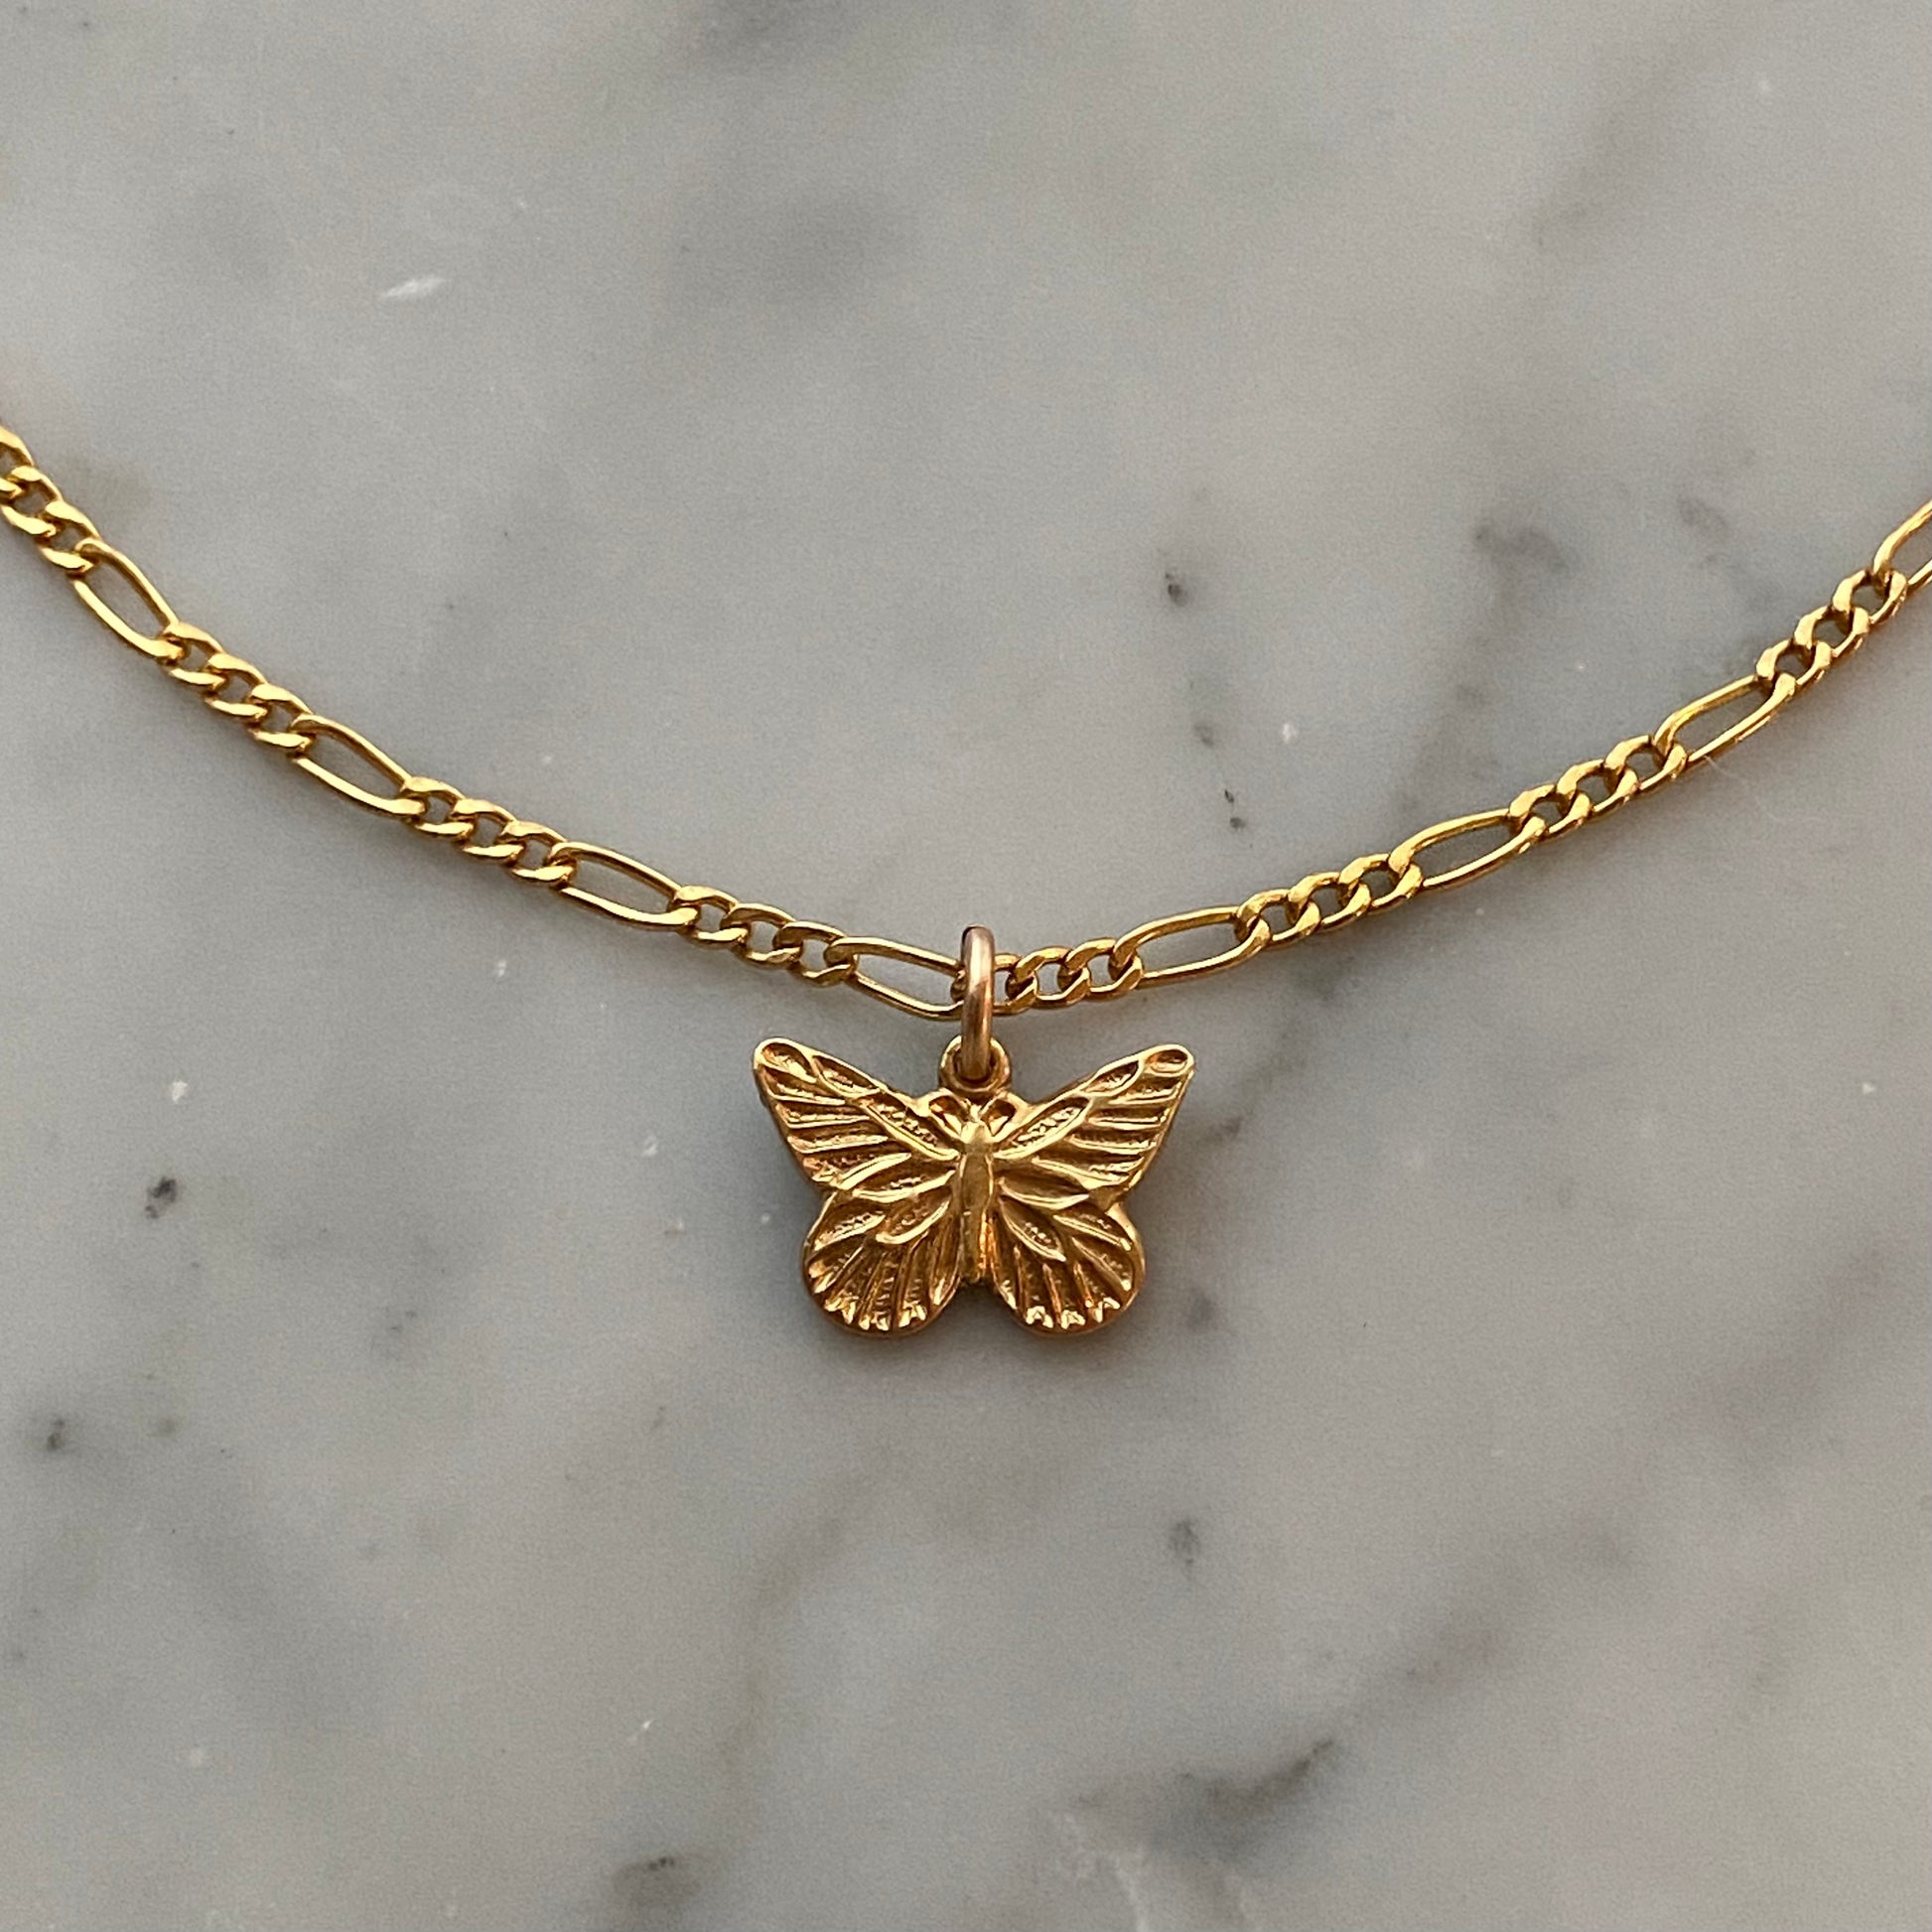 Everyday waterproof gold and gold-filled jewelry accessories for sensitive skin, no tarnish  dainty Figaro chain butterfly pendant charm necklace